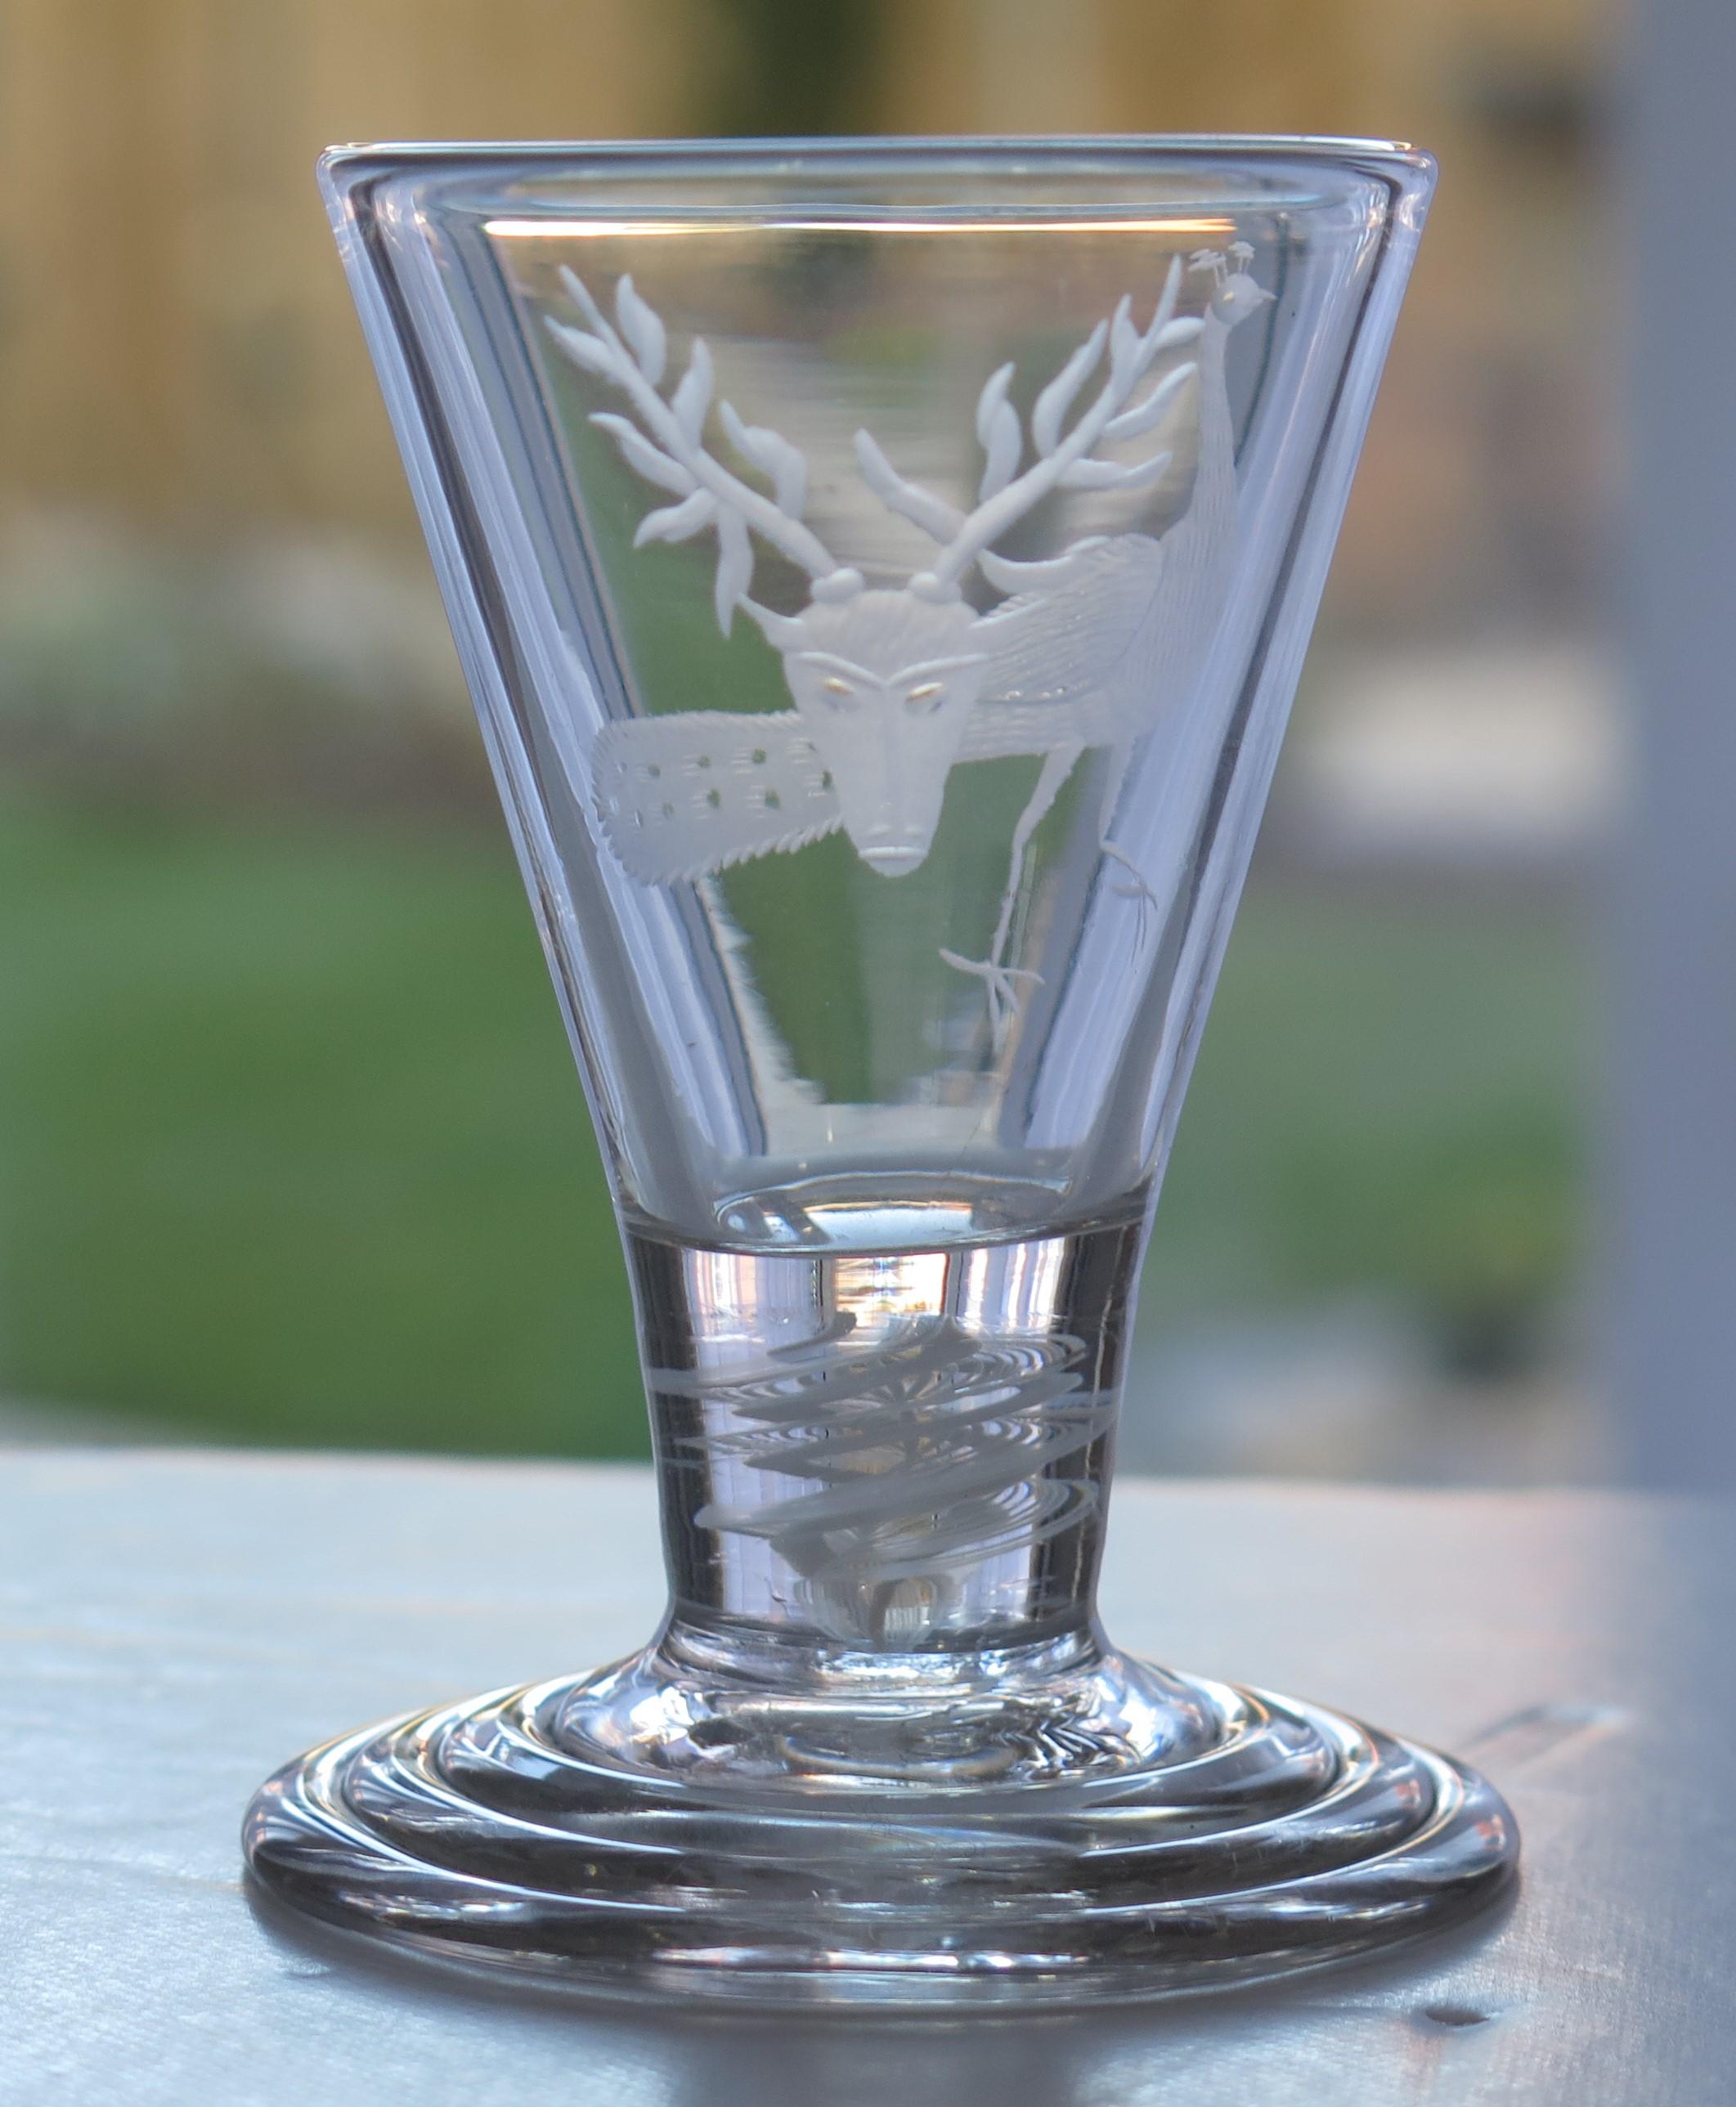 This is a fine, English, hand blown drinking glass, called a Firing Glass, made from lead glass in the 18th century, circa 1765.

Short, heavy, thick stemmed glasses like this with a thick foot and short stem are known as firing glasses, as they